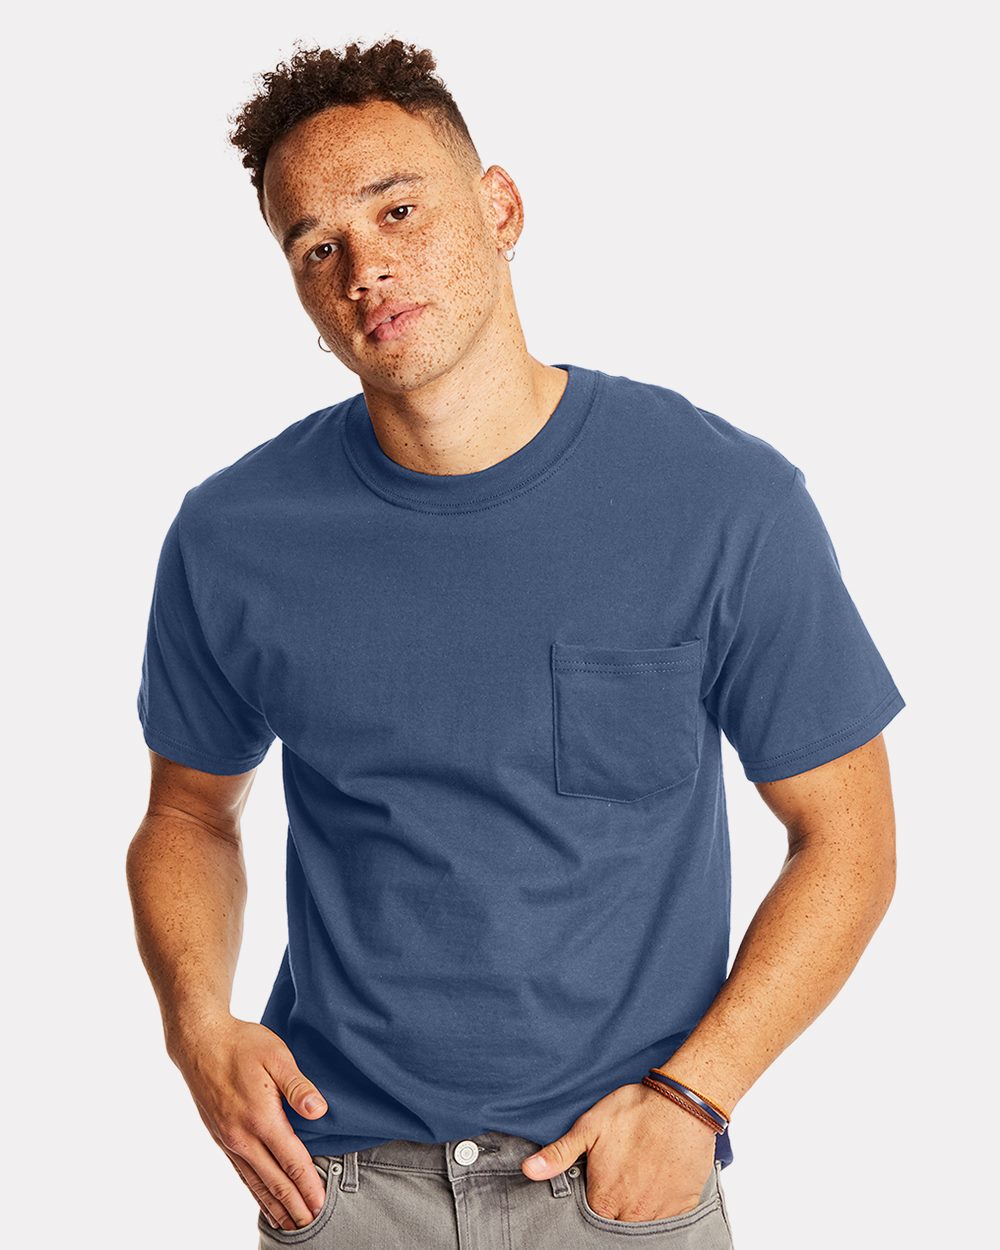 Hanes Mens Short Sleeve Beefy-T 100% Cotton Crew Neck T-Shirt with Pocket 5190